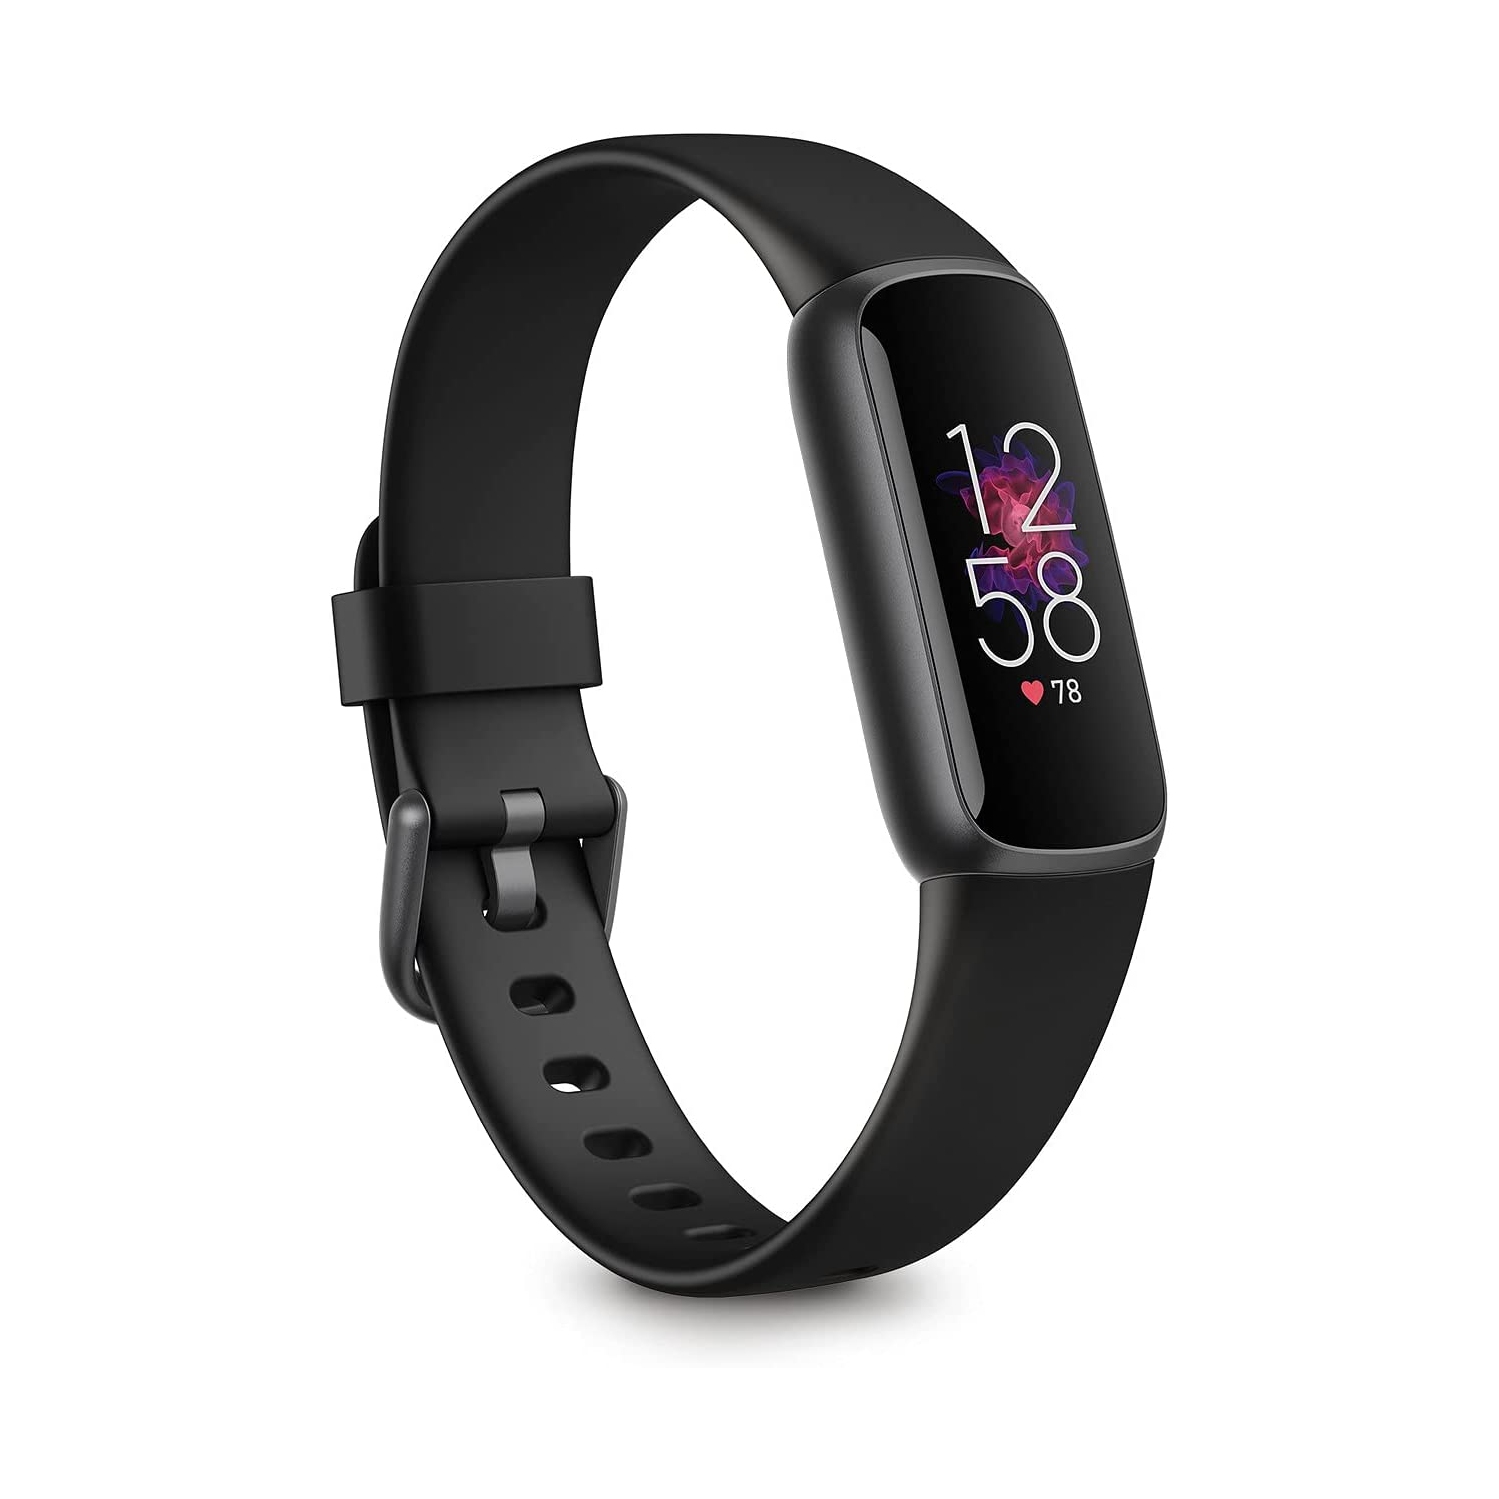 Fitbit Luxe Fitness and Wellness Tracker with Stress Management, Sleep Tracking and 24/7 Heart Rate, Black/graphite, One Size (S and L Bands Included)